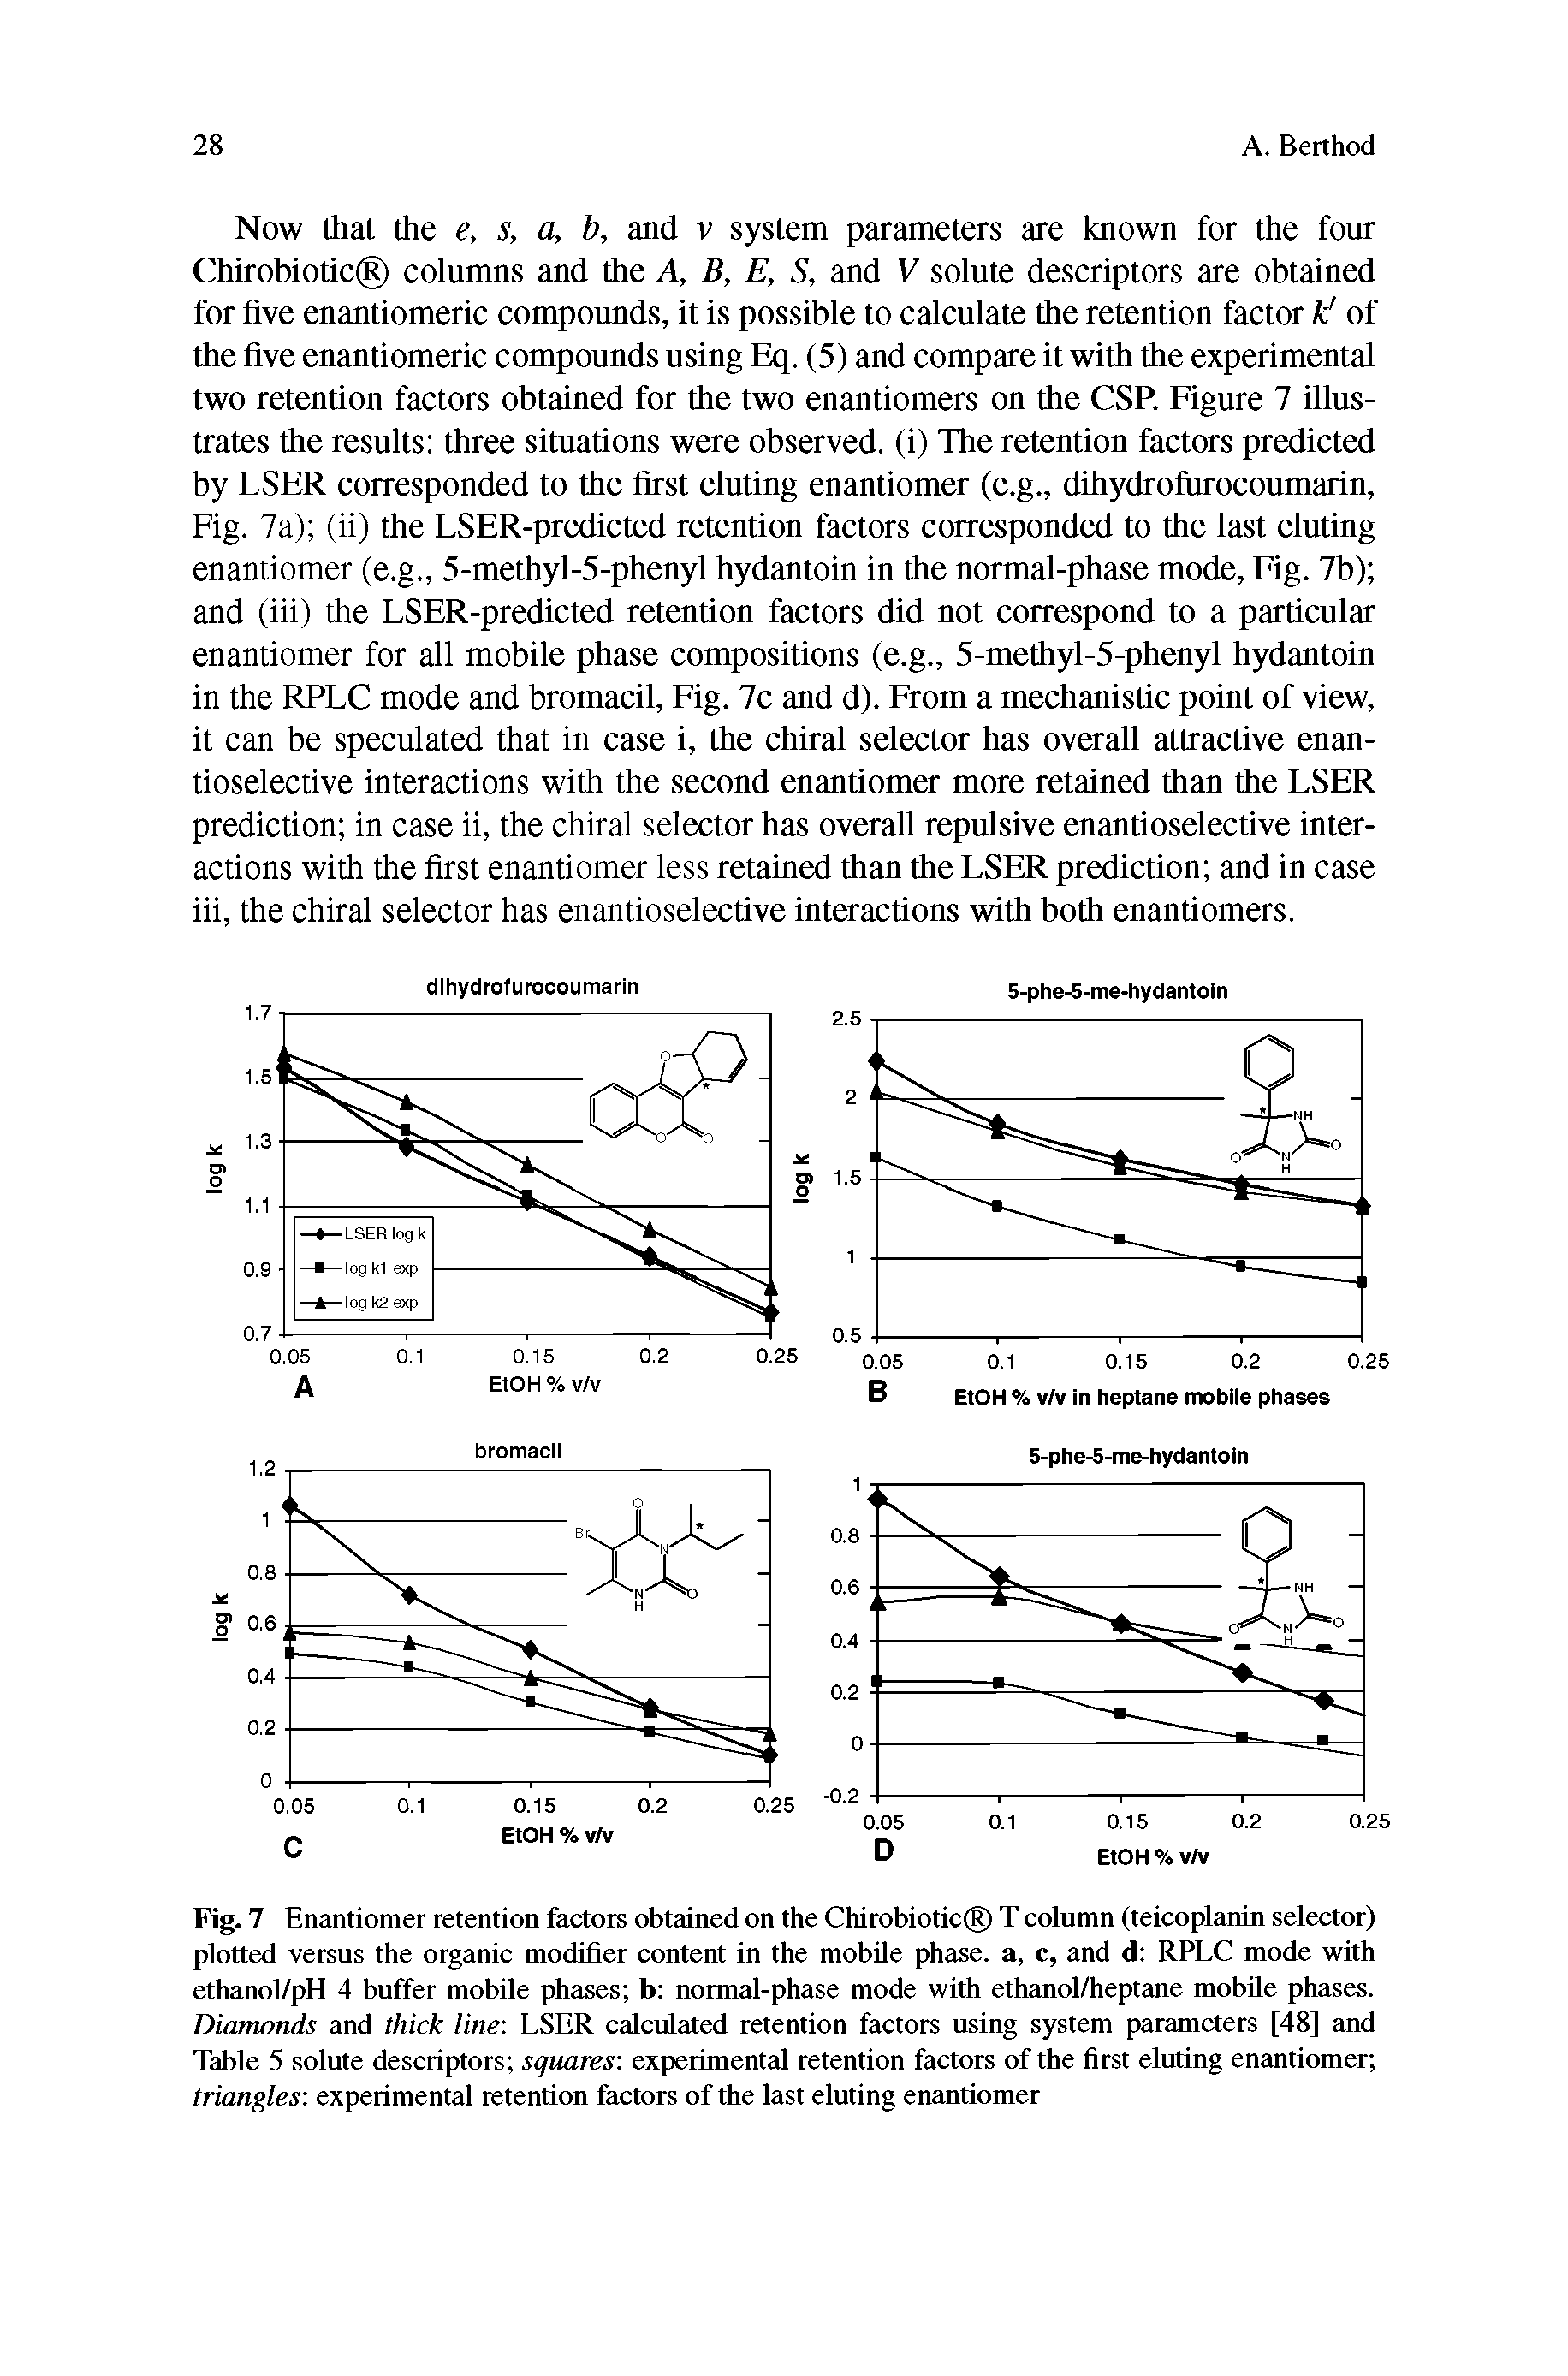 Fig. 7 Eneintiomer retention factors obtained on the Chirobiotic T column (teicoplanin selector) plotted versus the oiganic modifier content in the mobile phtise. a, c, and d RPLC mode with ethanol/pH 4 buffer mobile phases b normal-phase mode with ethanol/hepttme mobile phases. Diamonds and thick line LSER calculated retention factors using system parameters [48] and Table 5 solute descriptors squares experimental retention factors of the first eluting entmtiomer triangles experimenUil retention factors of the last eluting enantiomer...